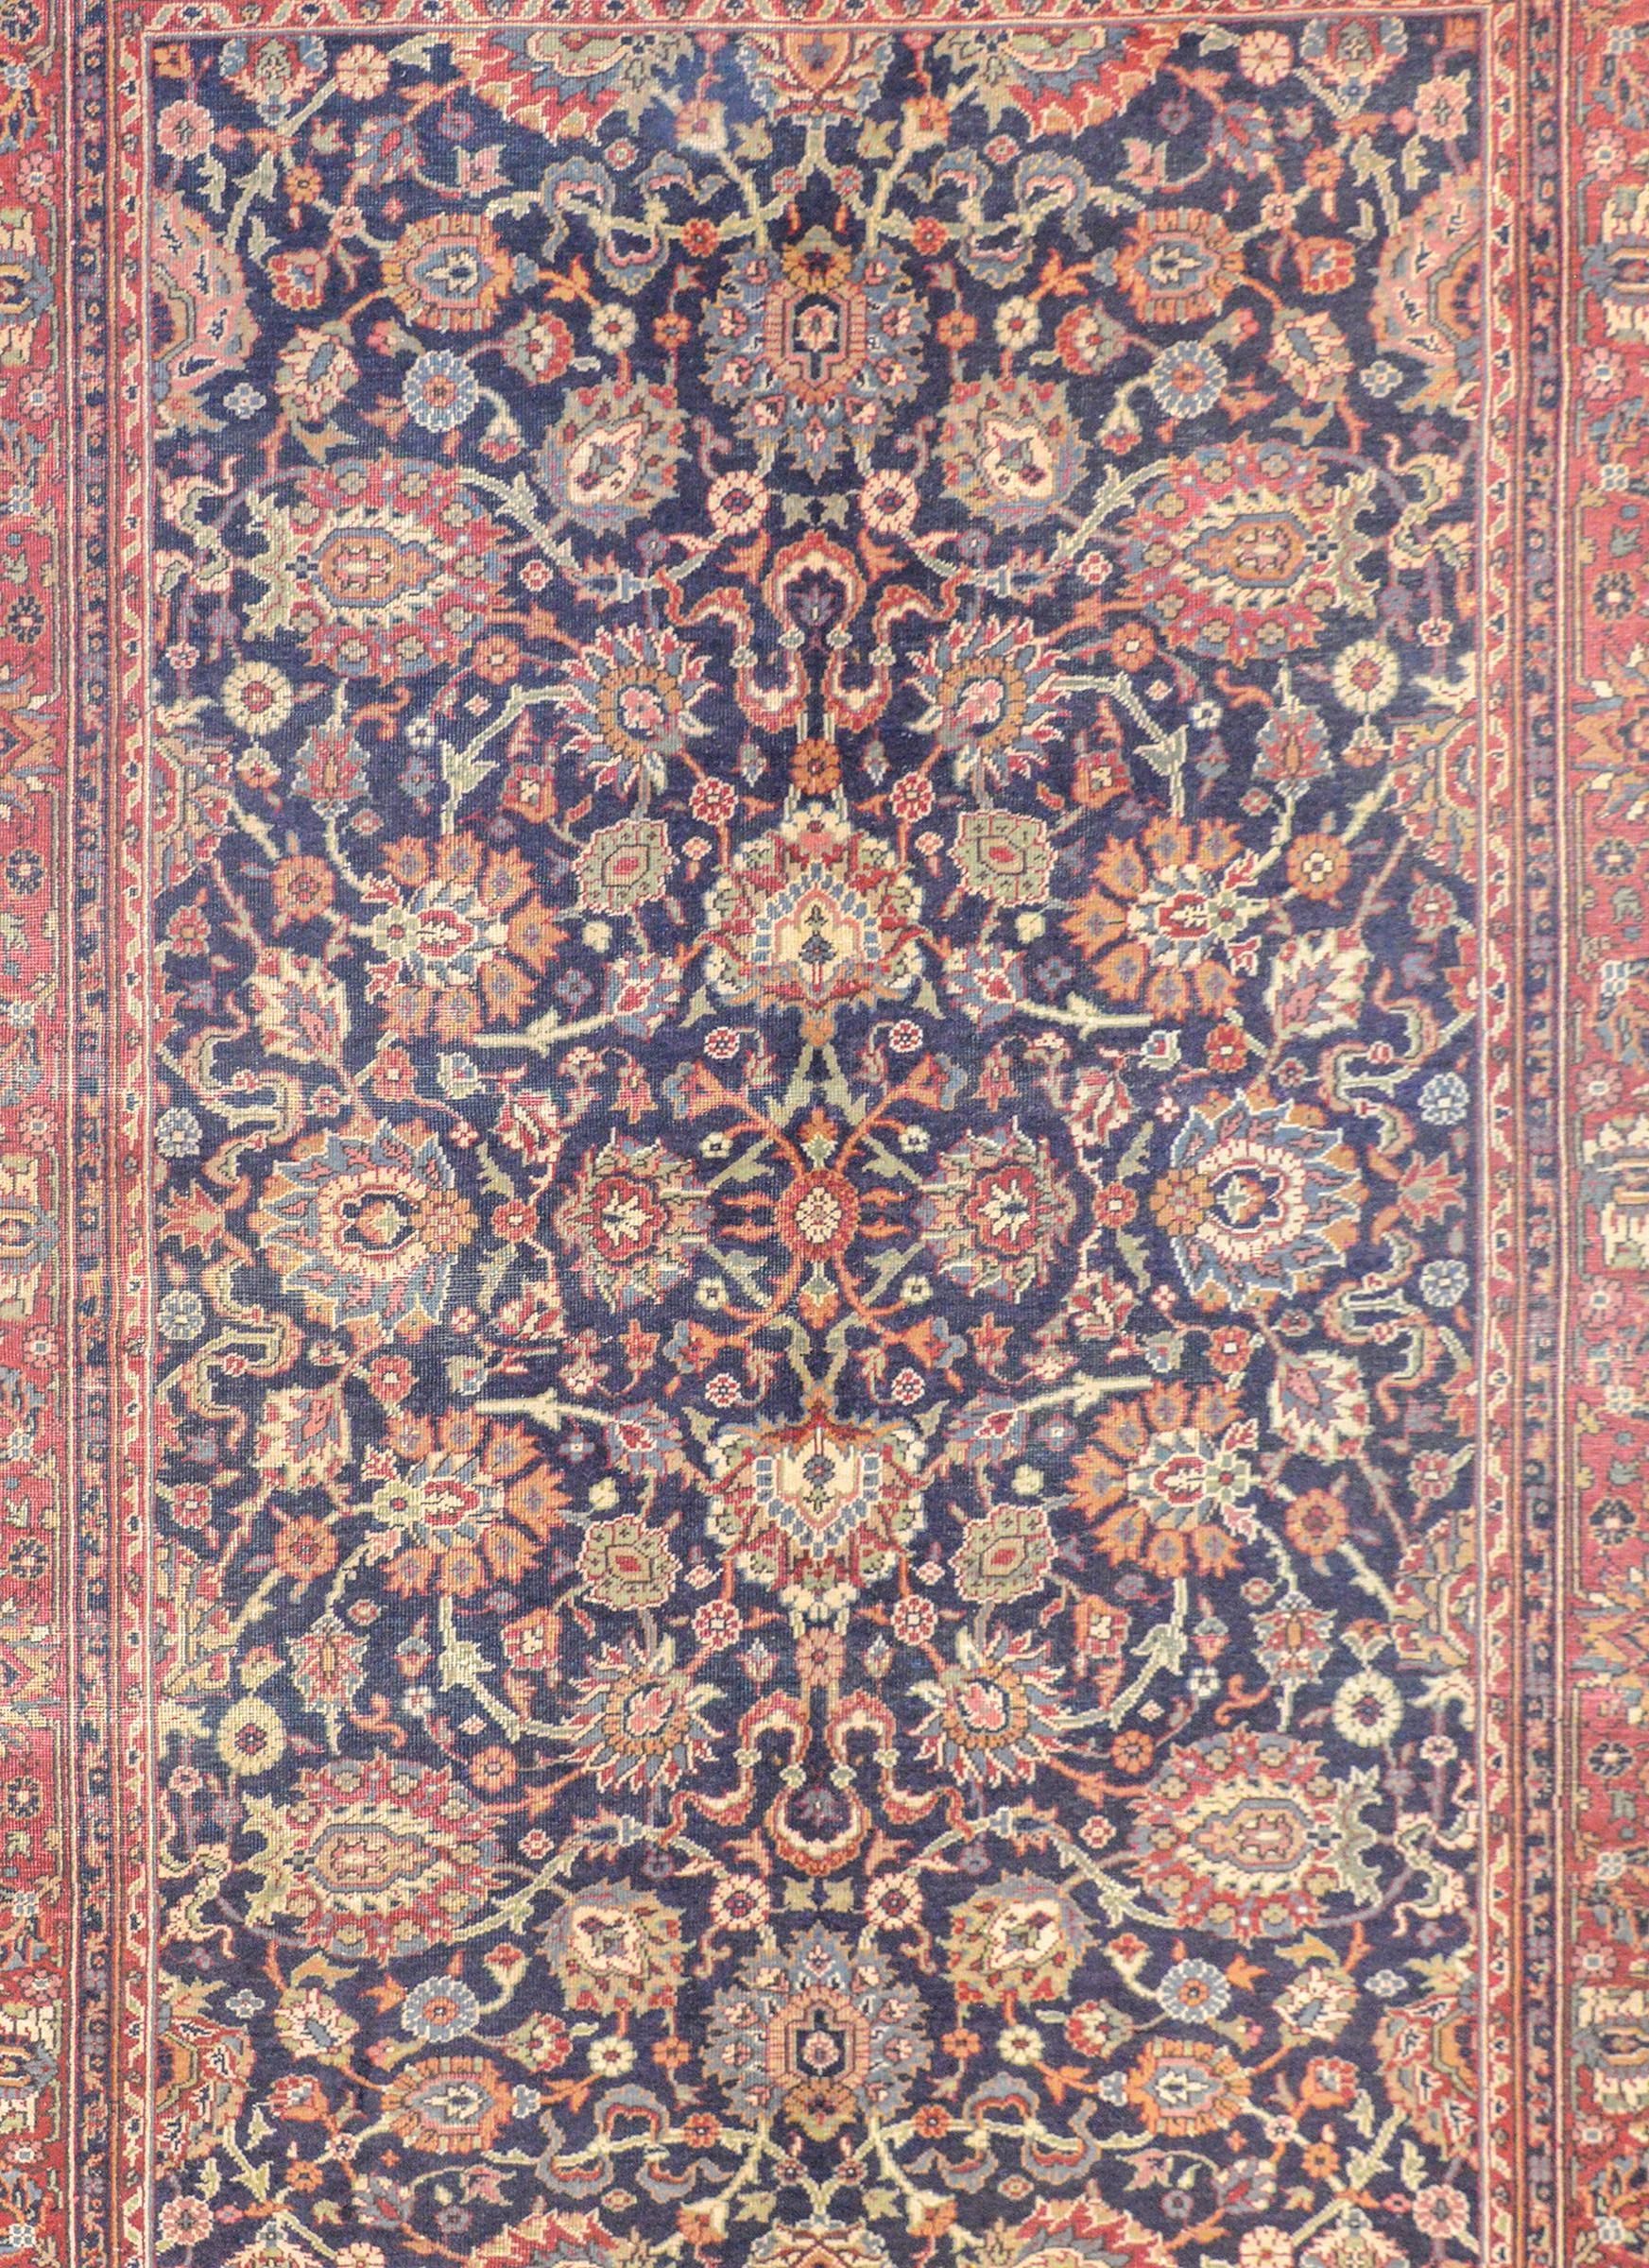 An amazing early 20th century Turkish Sparta rug with a fantastic all-over large-scale floral pattern woven in crimson, green, gold, and cream colored wool against a dark indigo background. The border is wide with a large-scale floral and vine